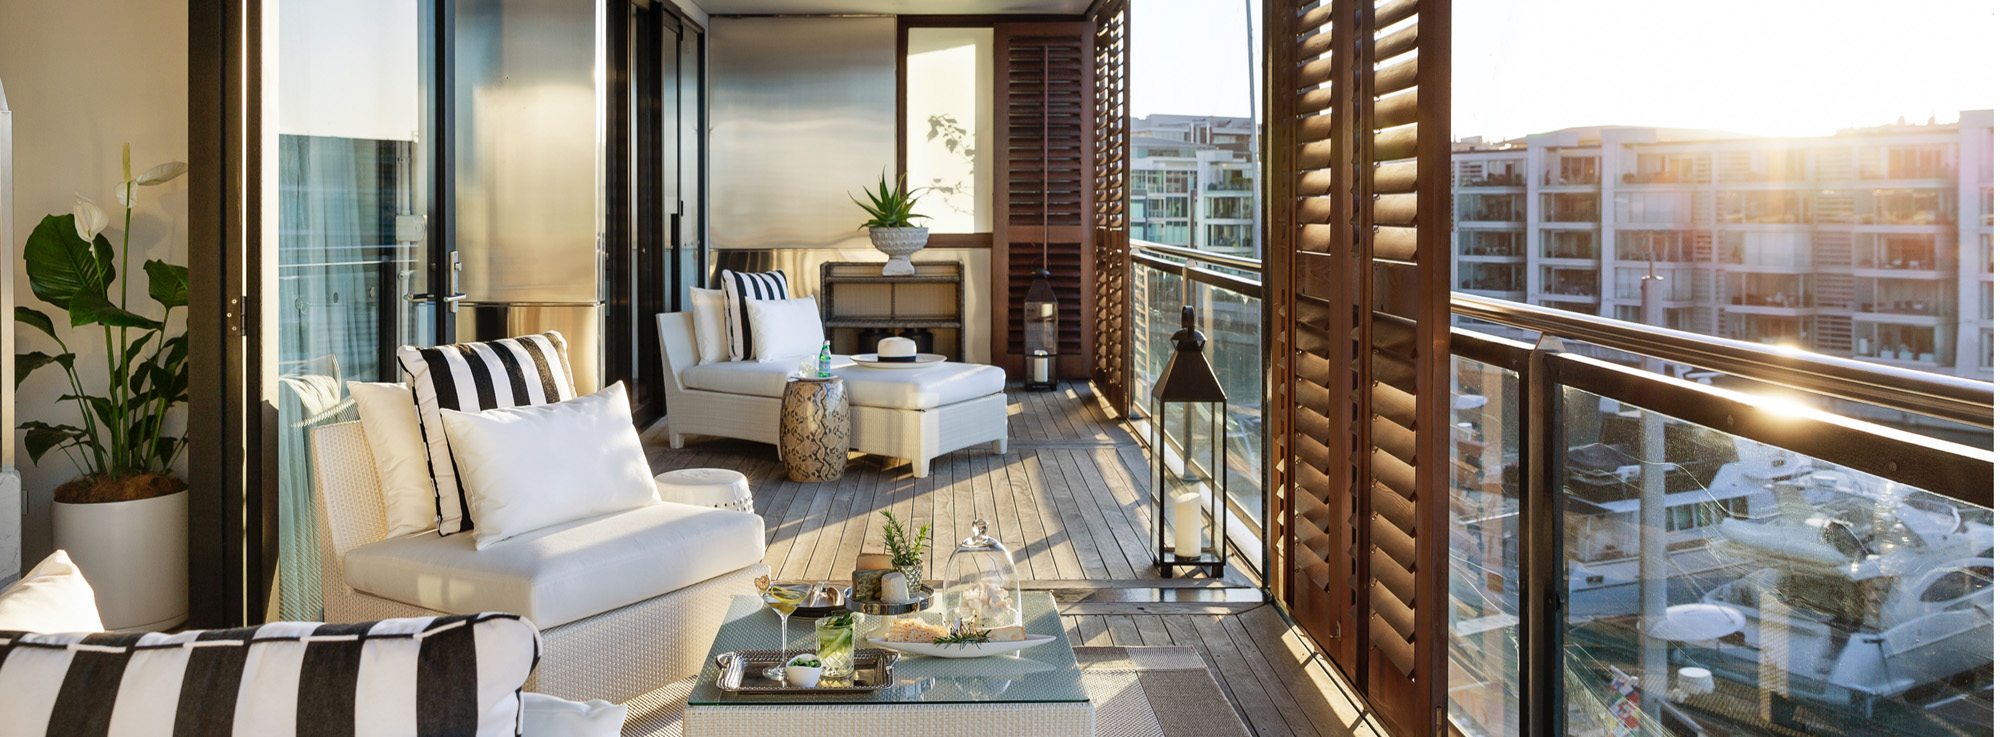 Luxurious Outdoor Alfresco Living Room & Viaduct Harbour Views - Sunset Cocktail Hour | Point Residence Executive Home For Rent